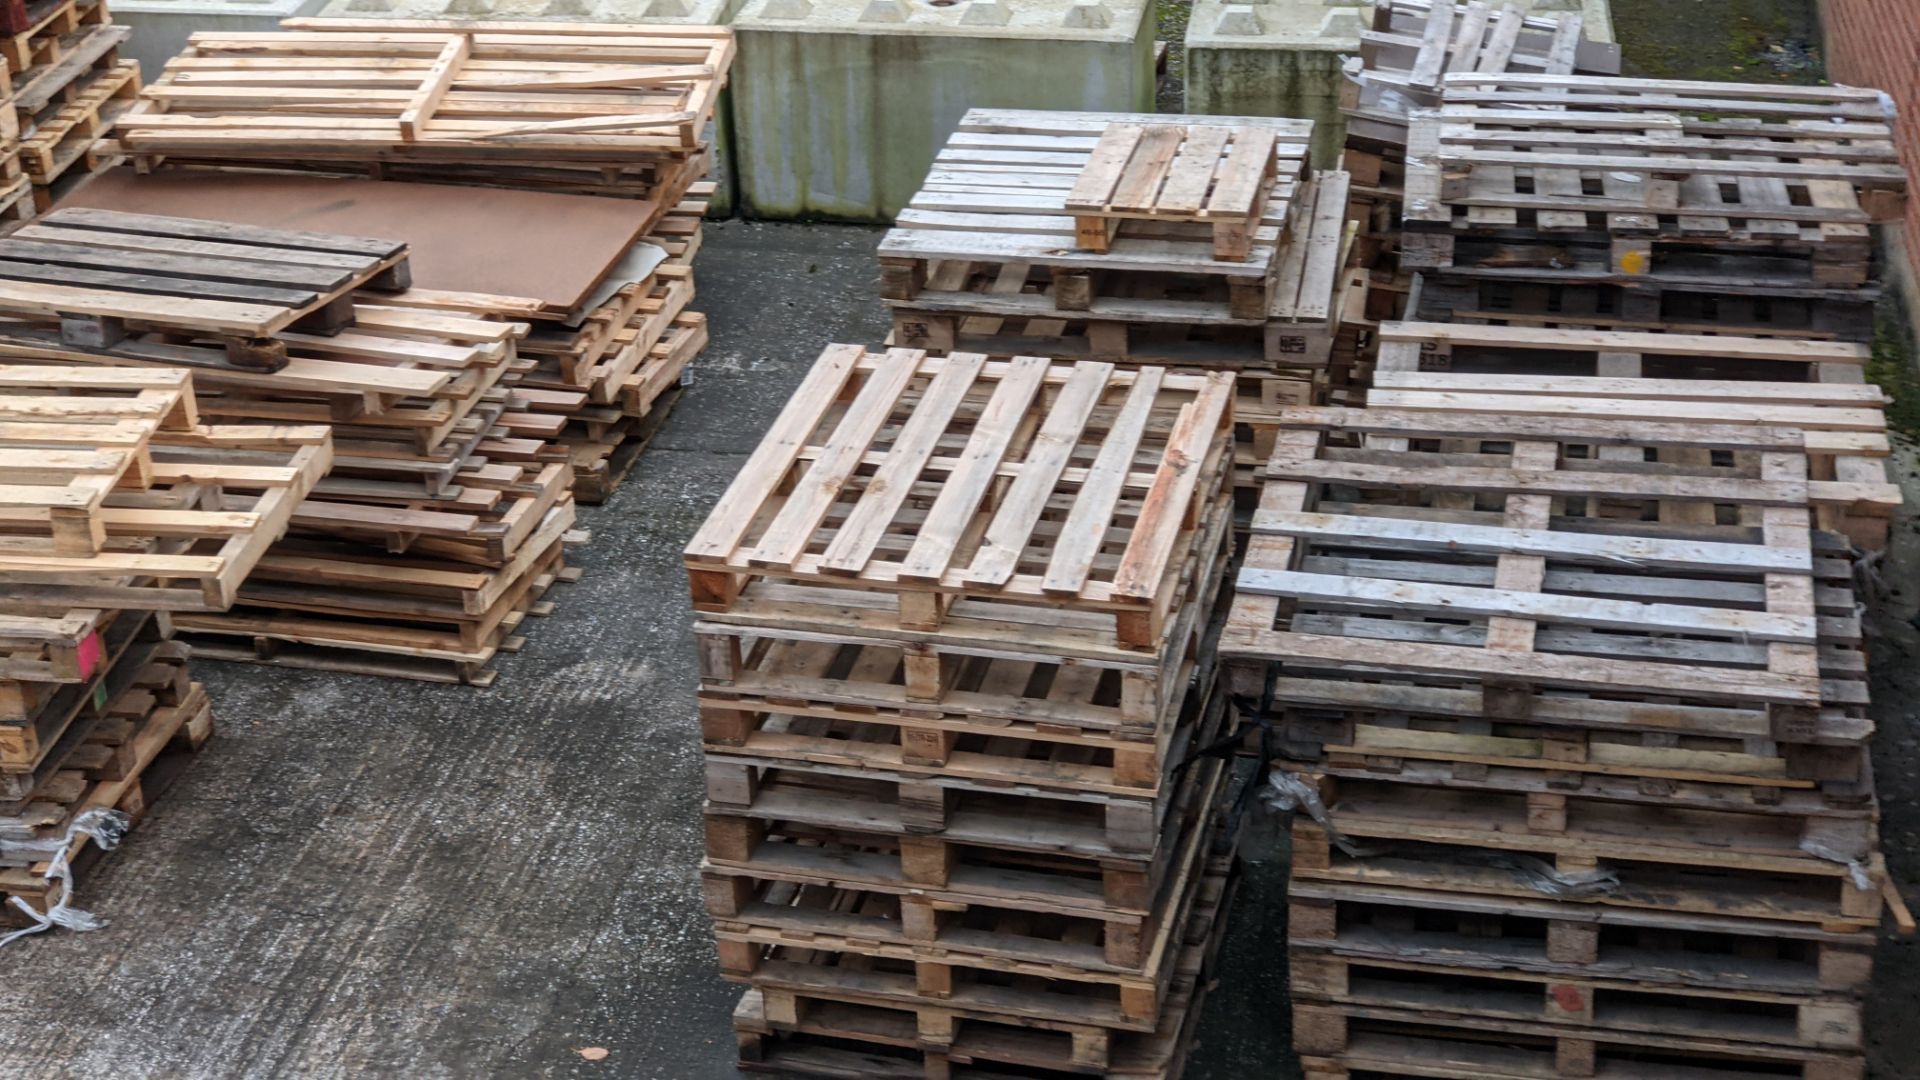 11 stacks of pallets, including regular size, euros, odd sizes and damaged. Approx 9-10 pallets per - Image 5 of 9